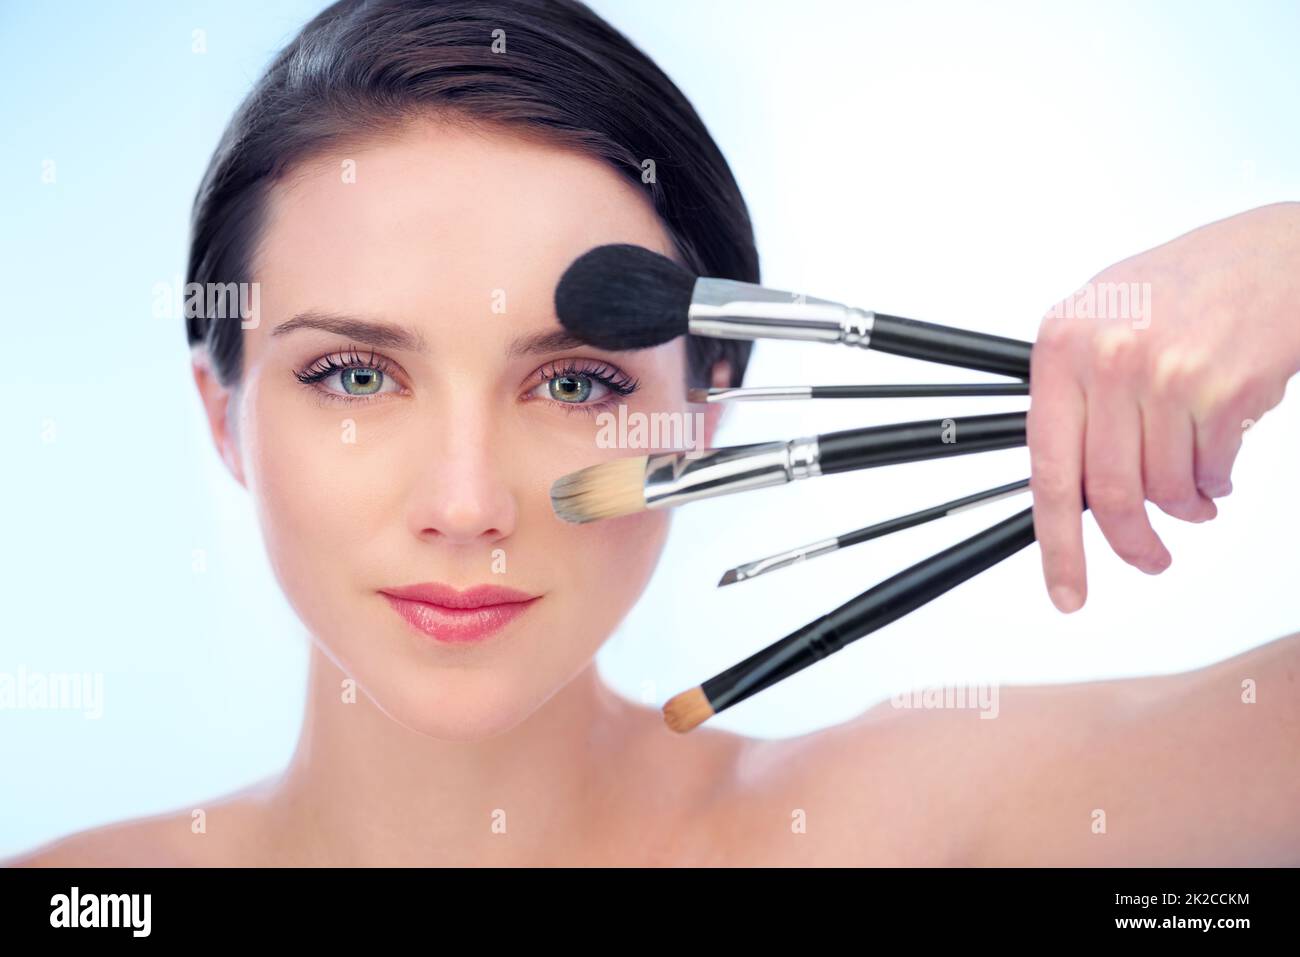 Tools of the beauty trade. A beautiful young woman holding a variety of make-up brushes. Stock Photo